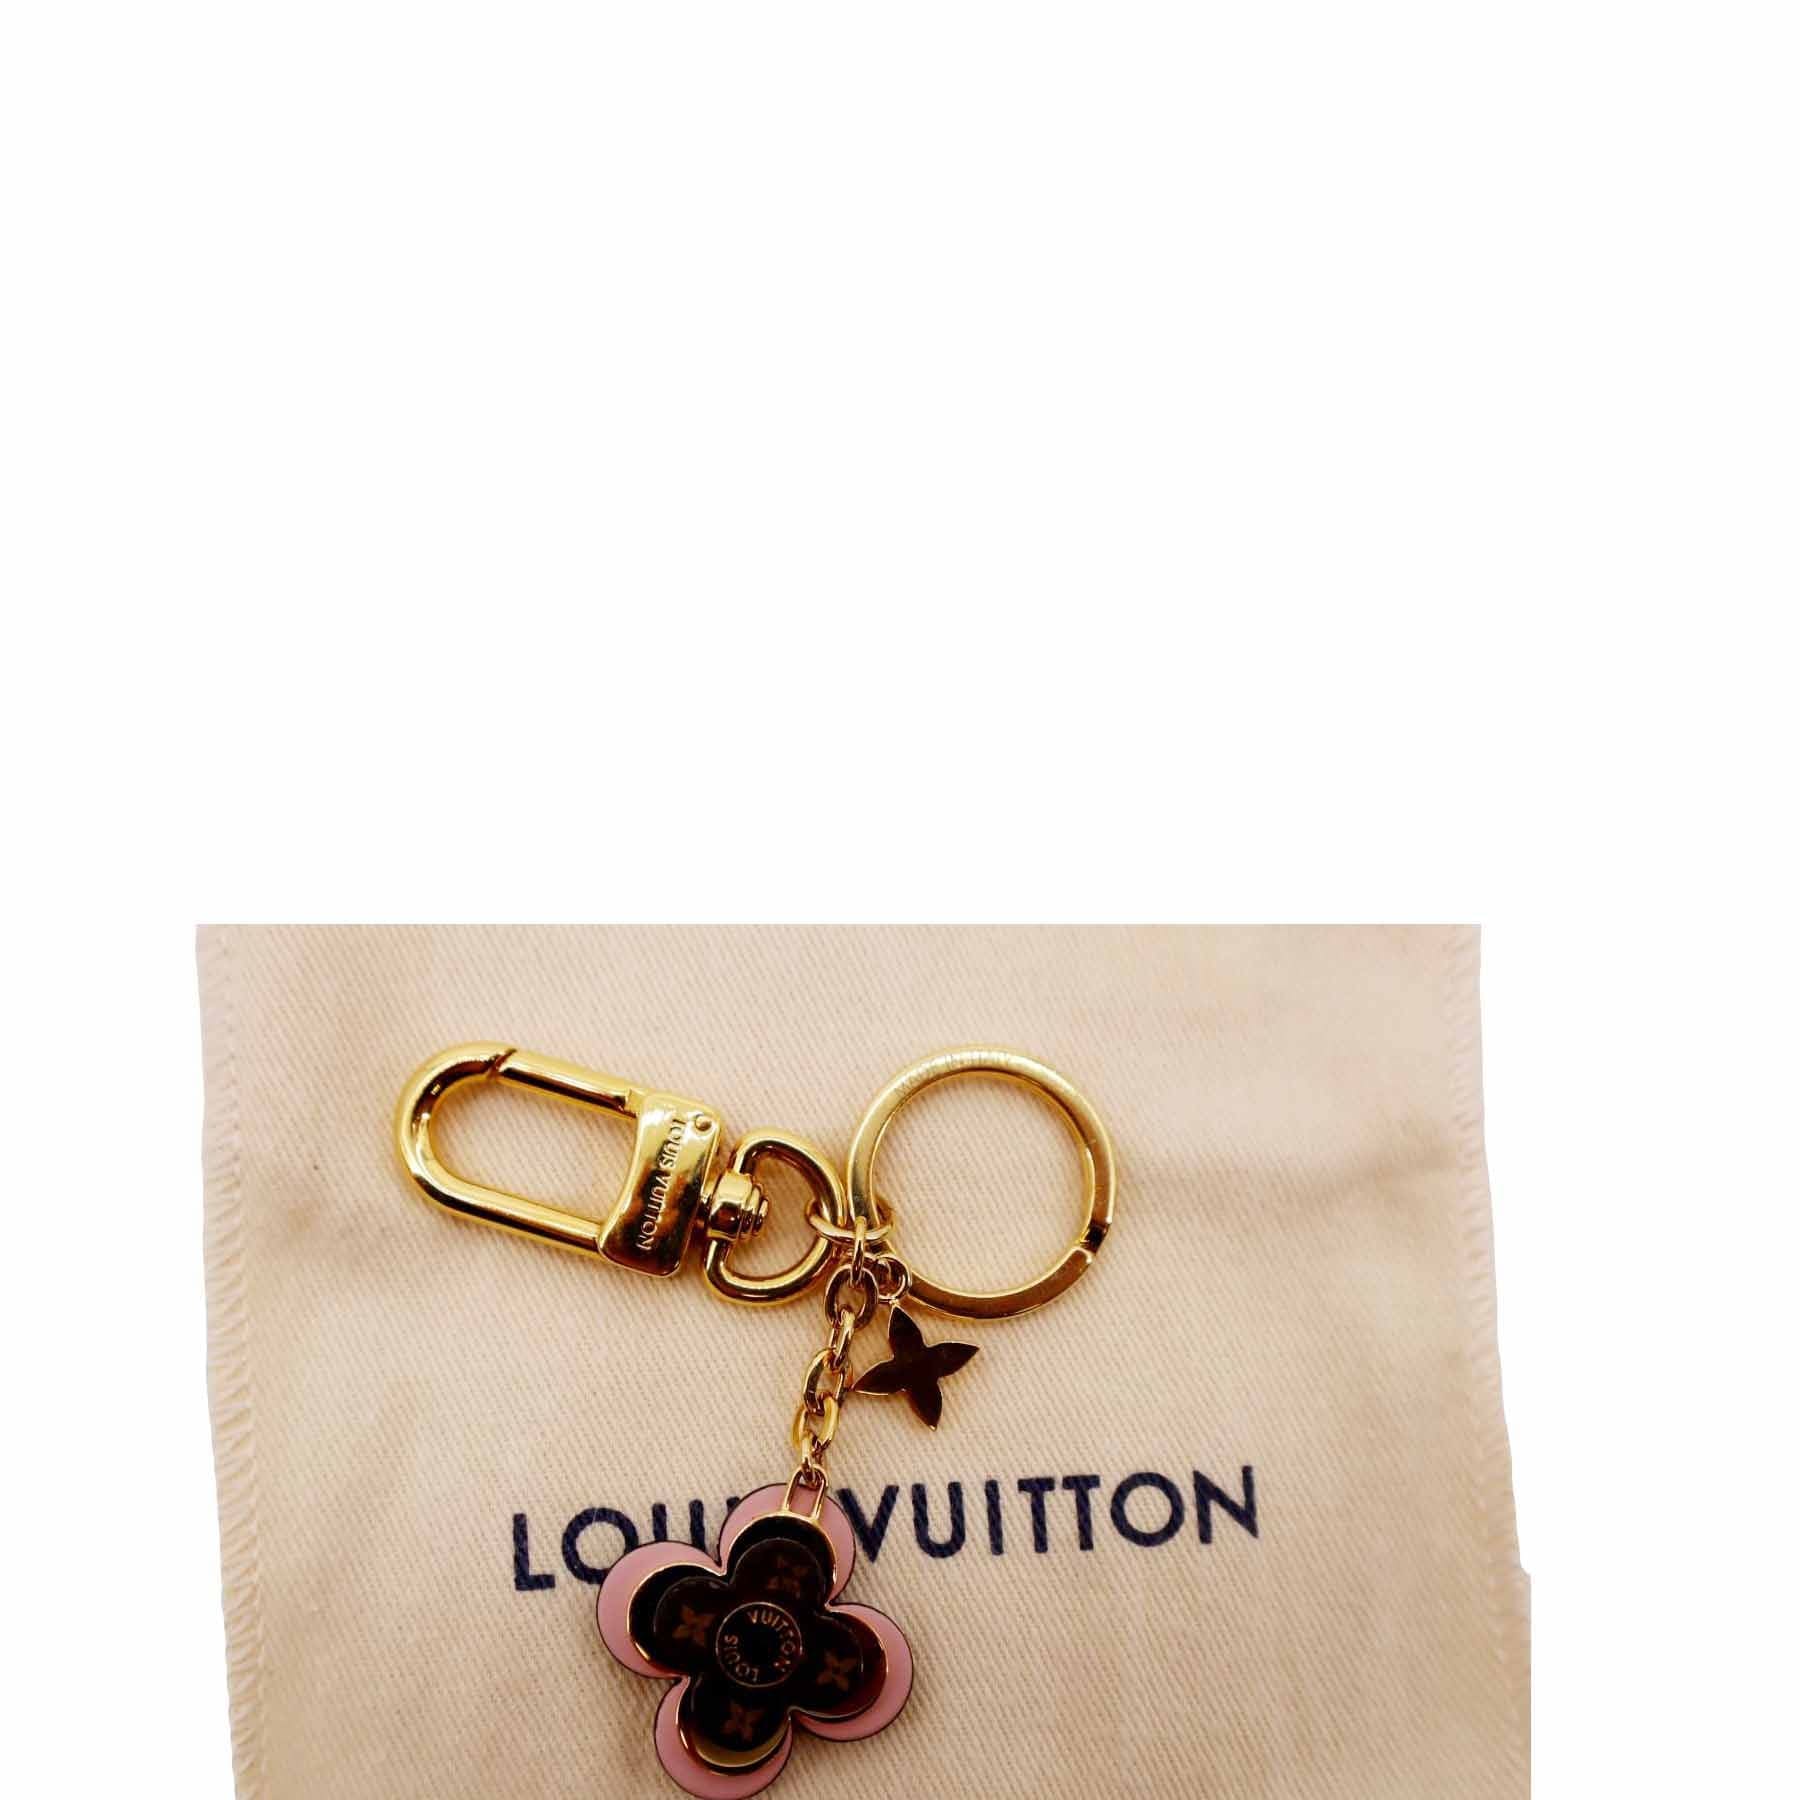 Blooming Flowers BB Bag Charm and Key Holder S00 - Women - Accessories